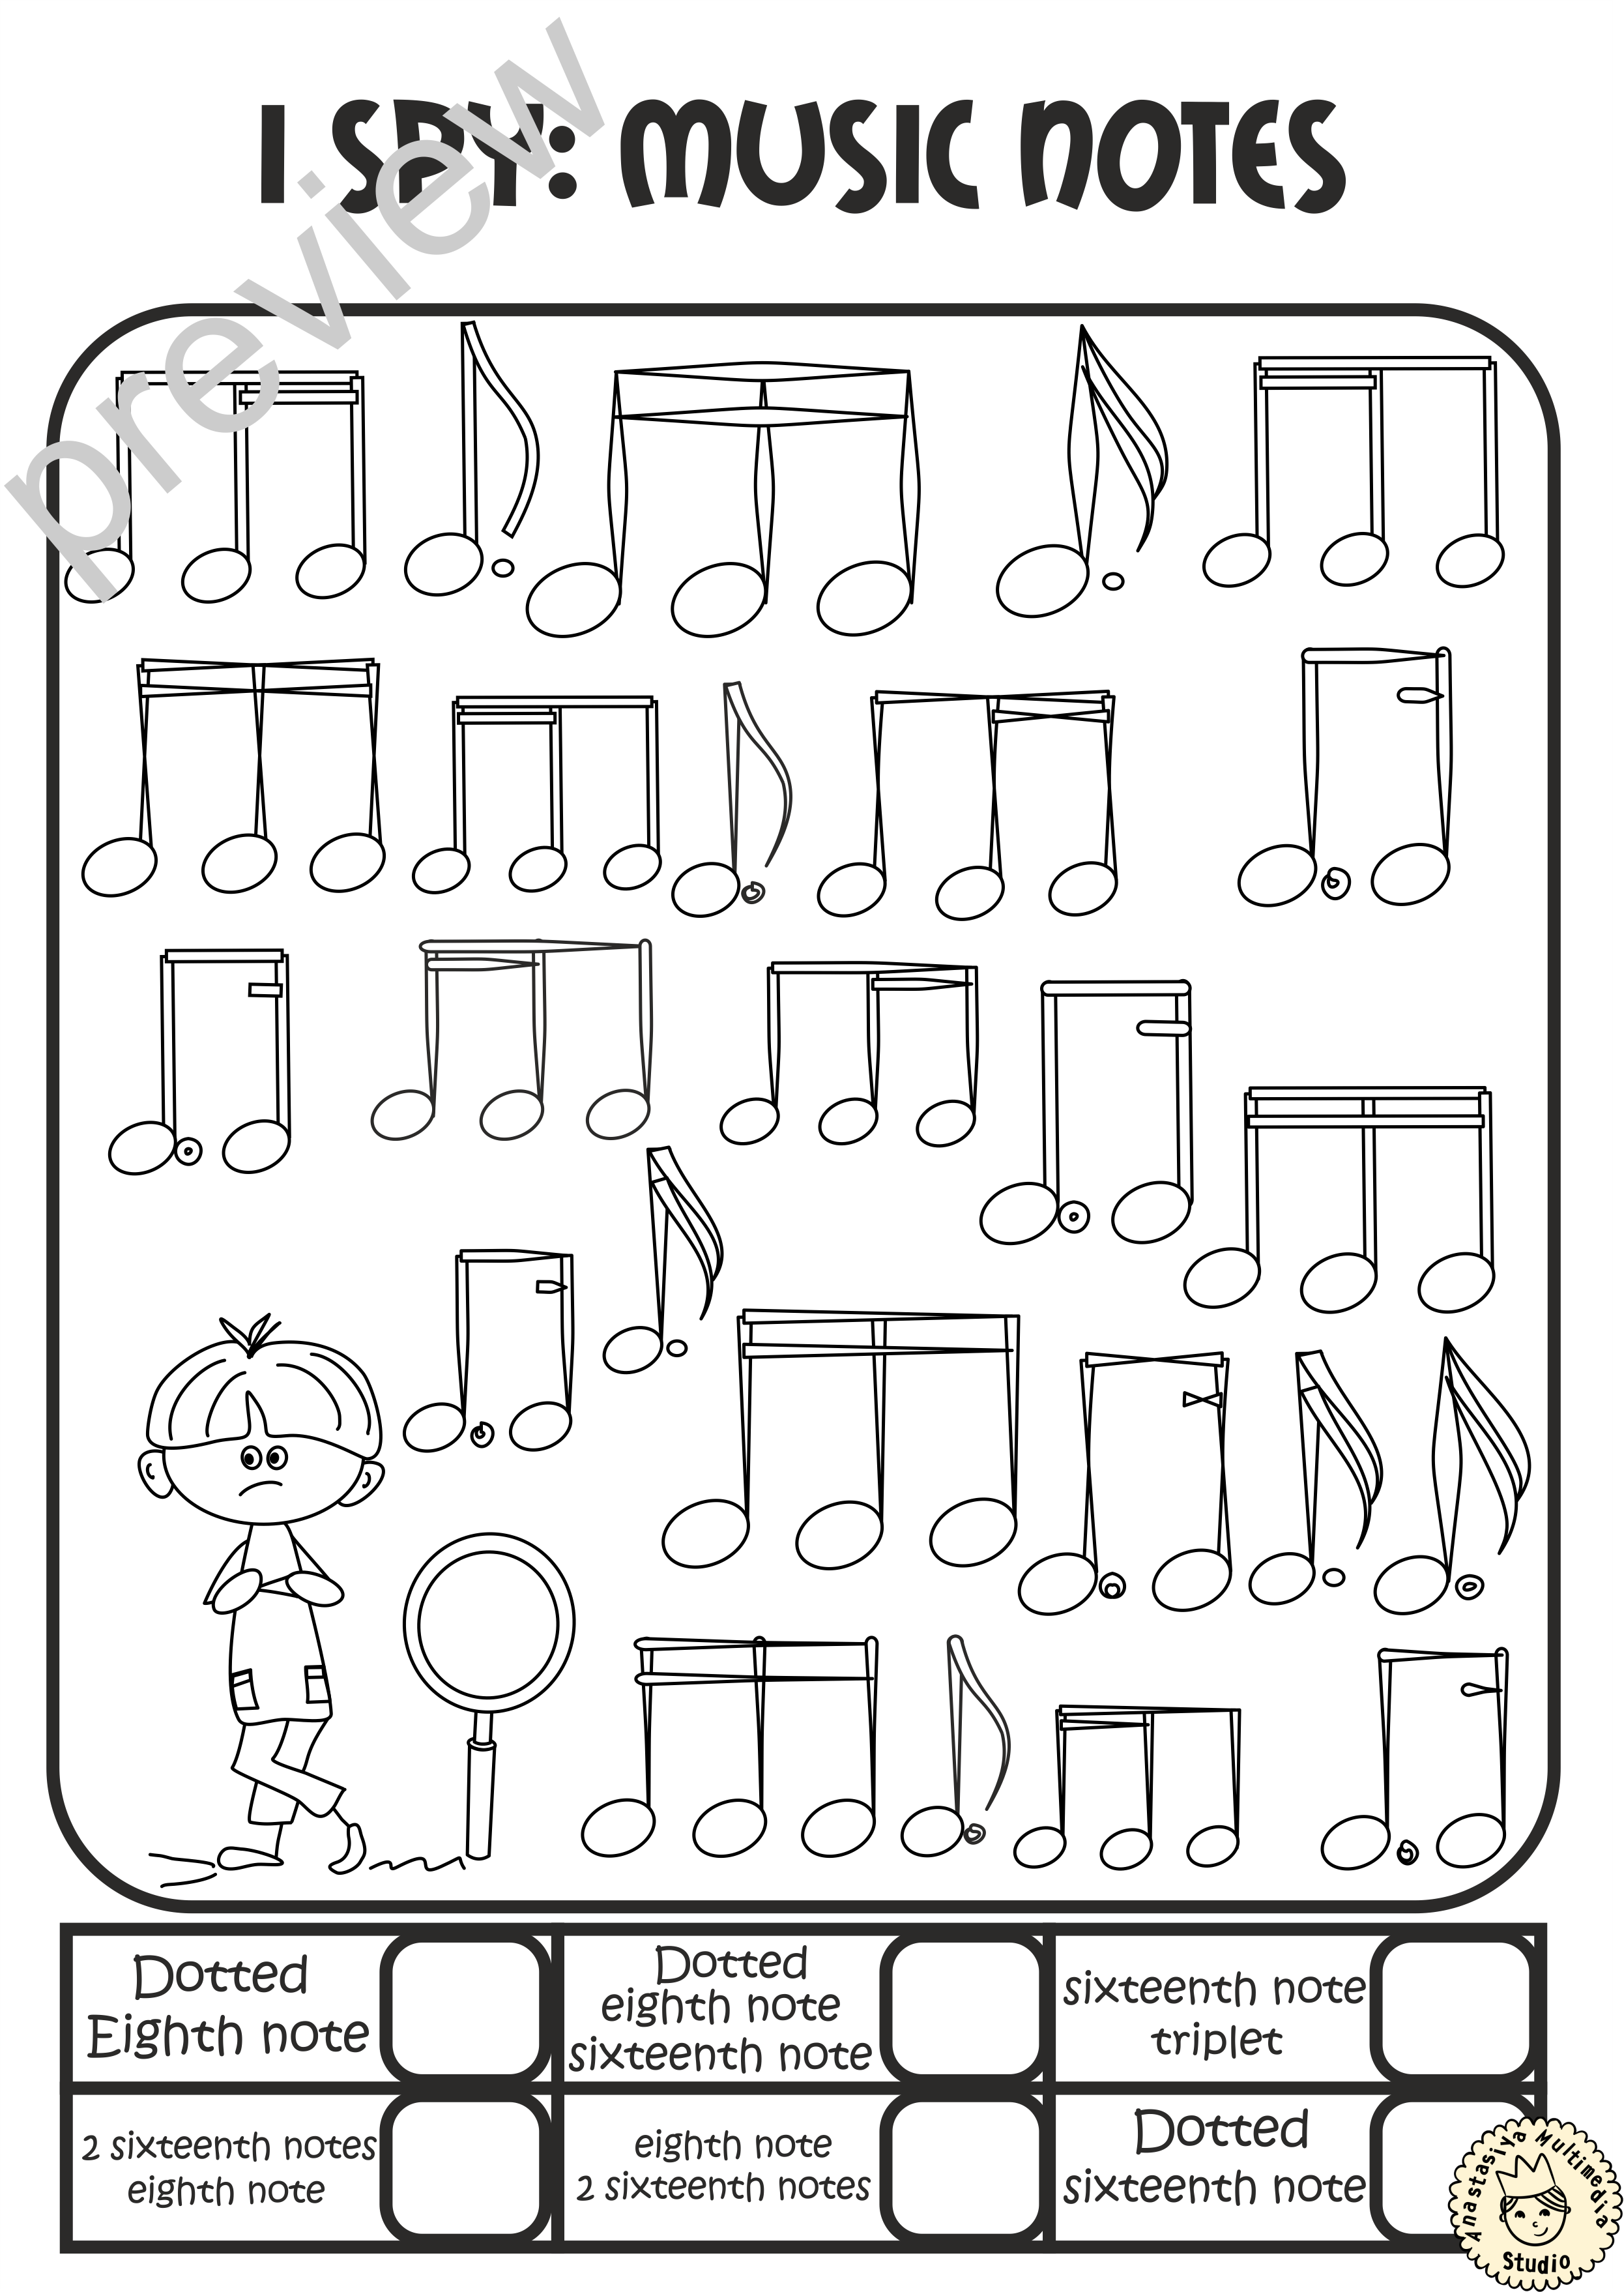 I Spy Music Notes and Symbols Coloring Games (img # 2)